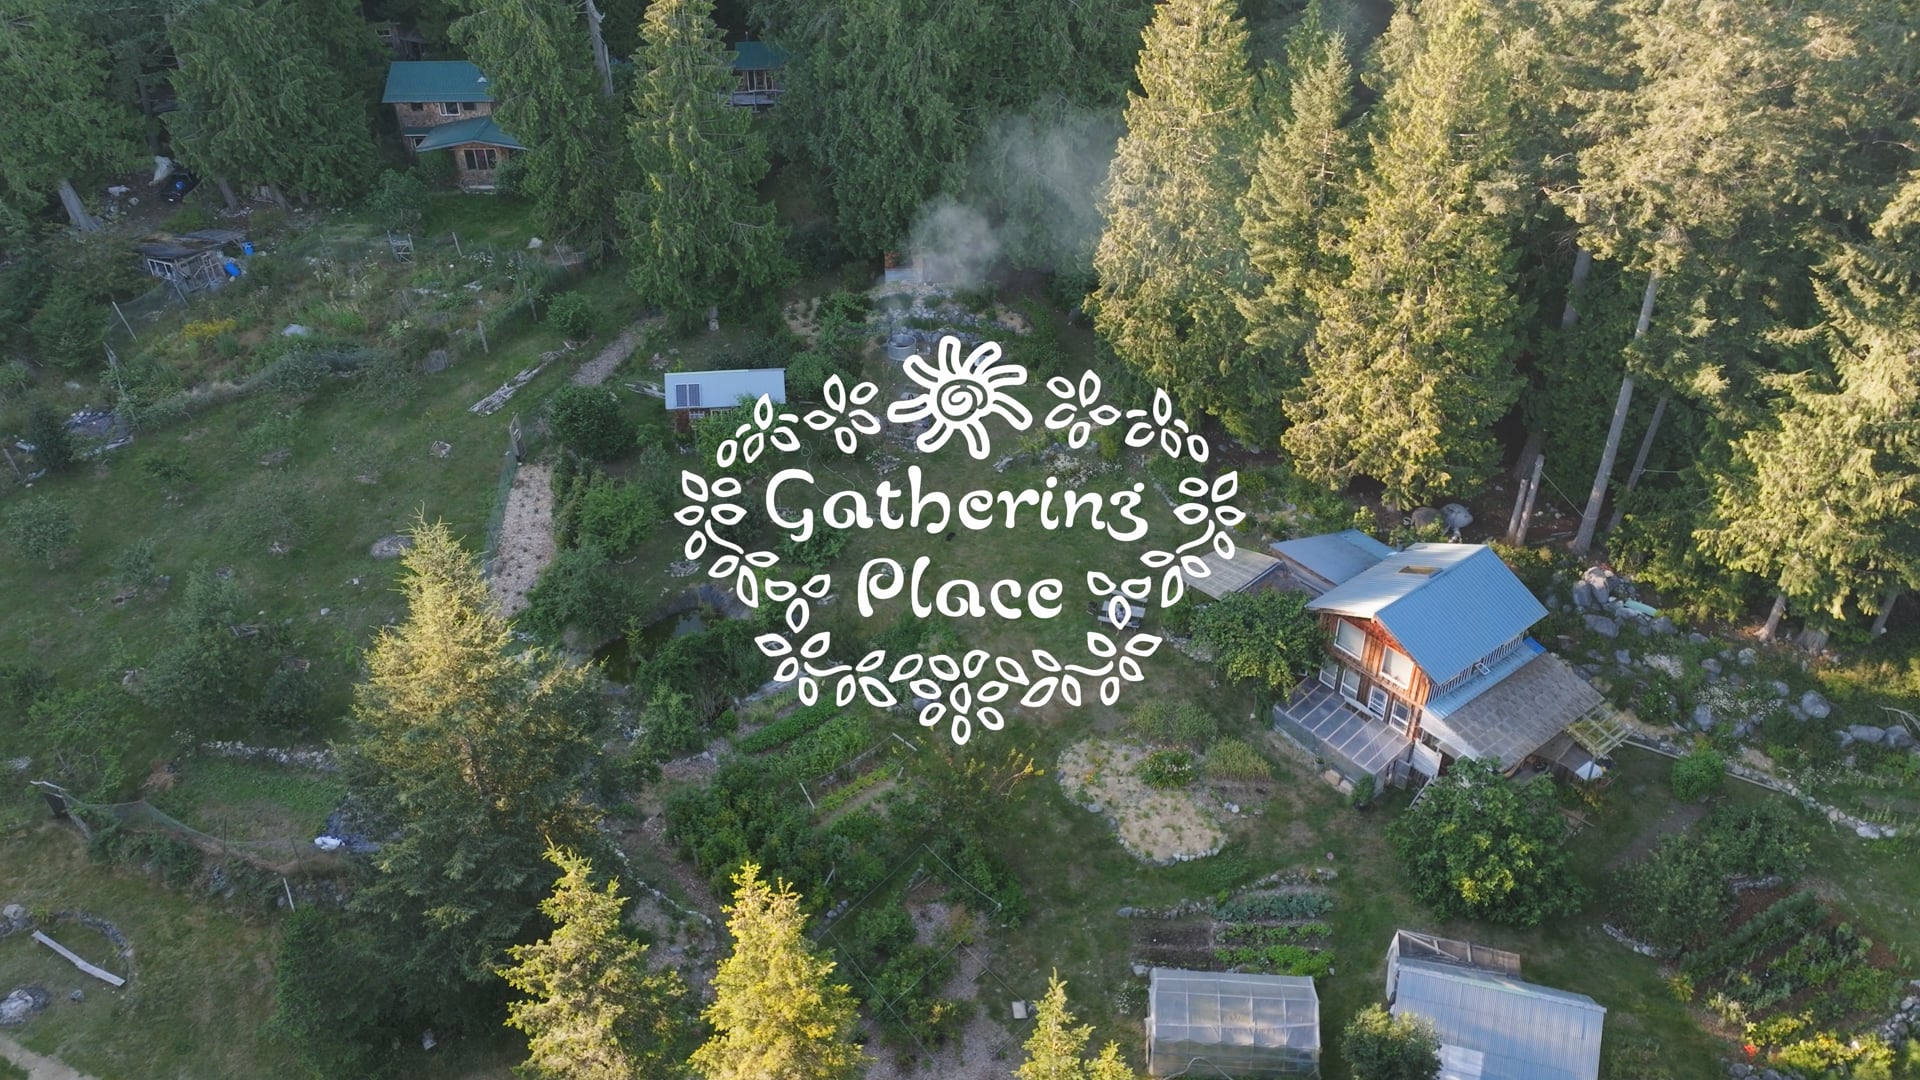 Gathering Place Trading | From Farmer to Family for Love of the Earth